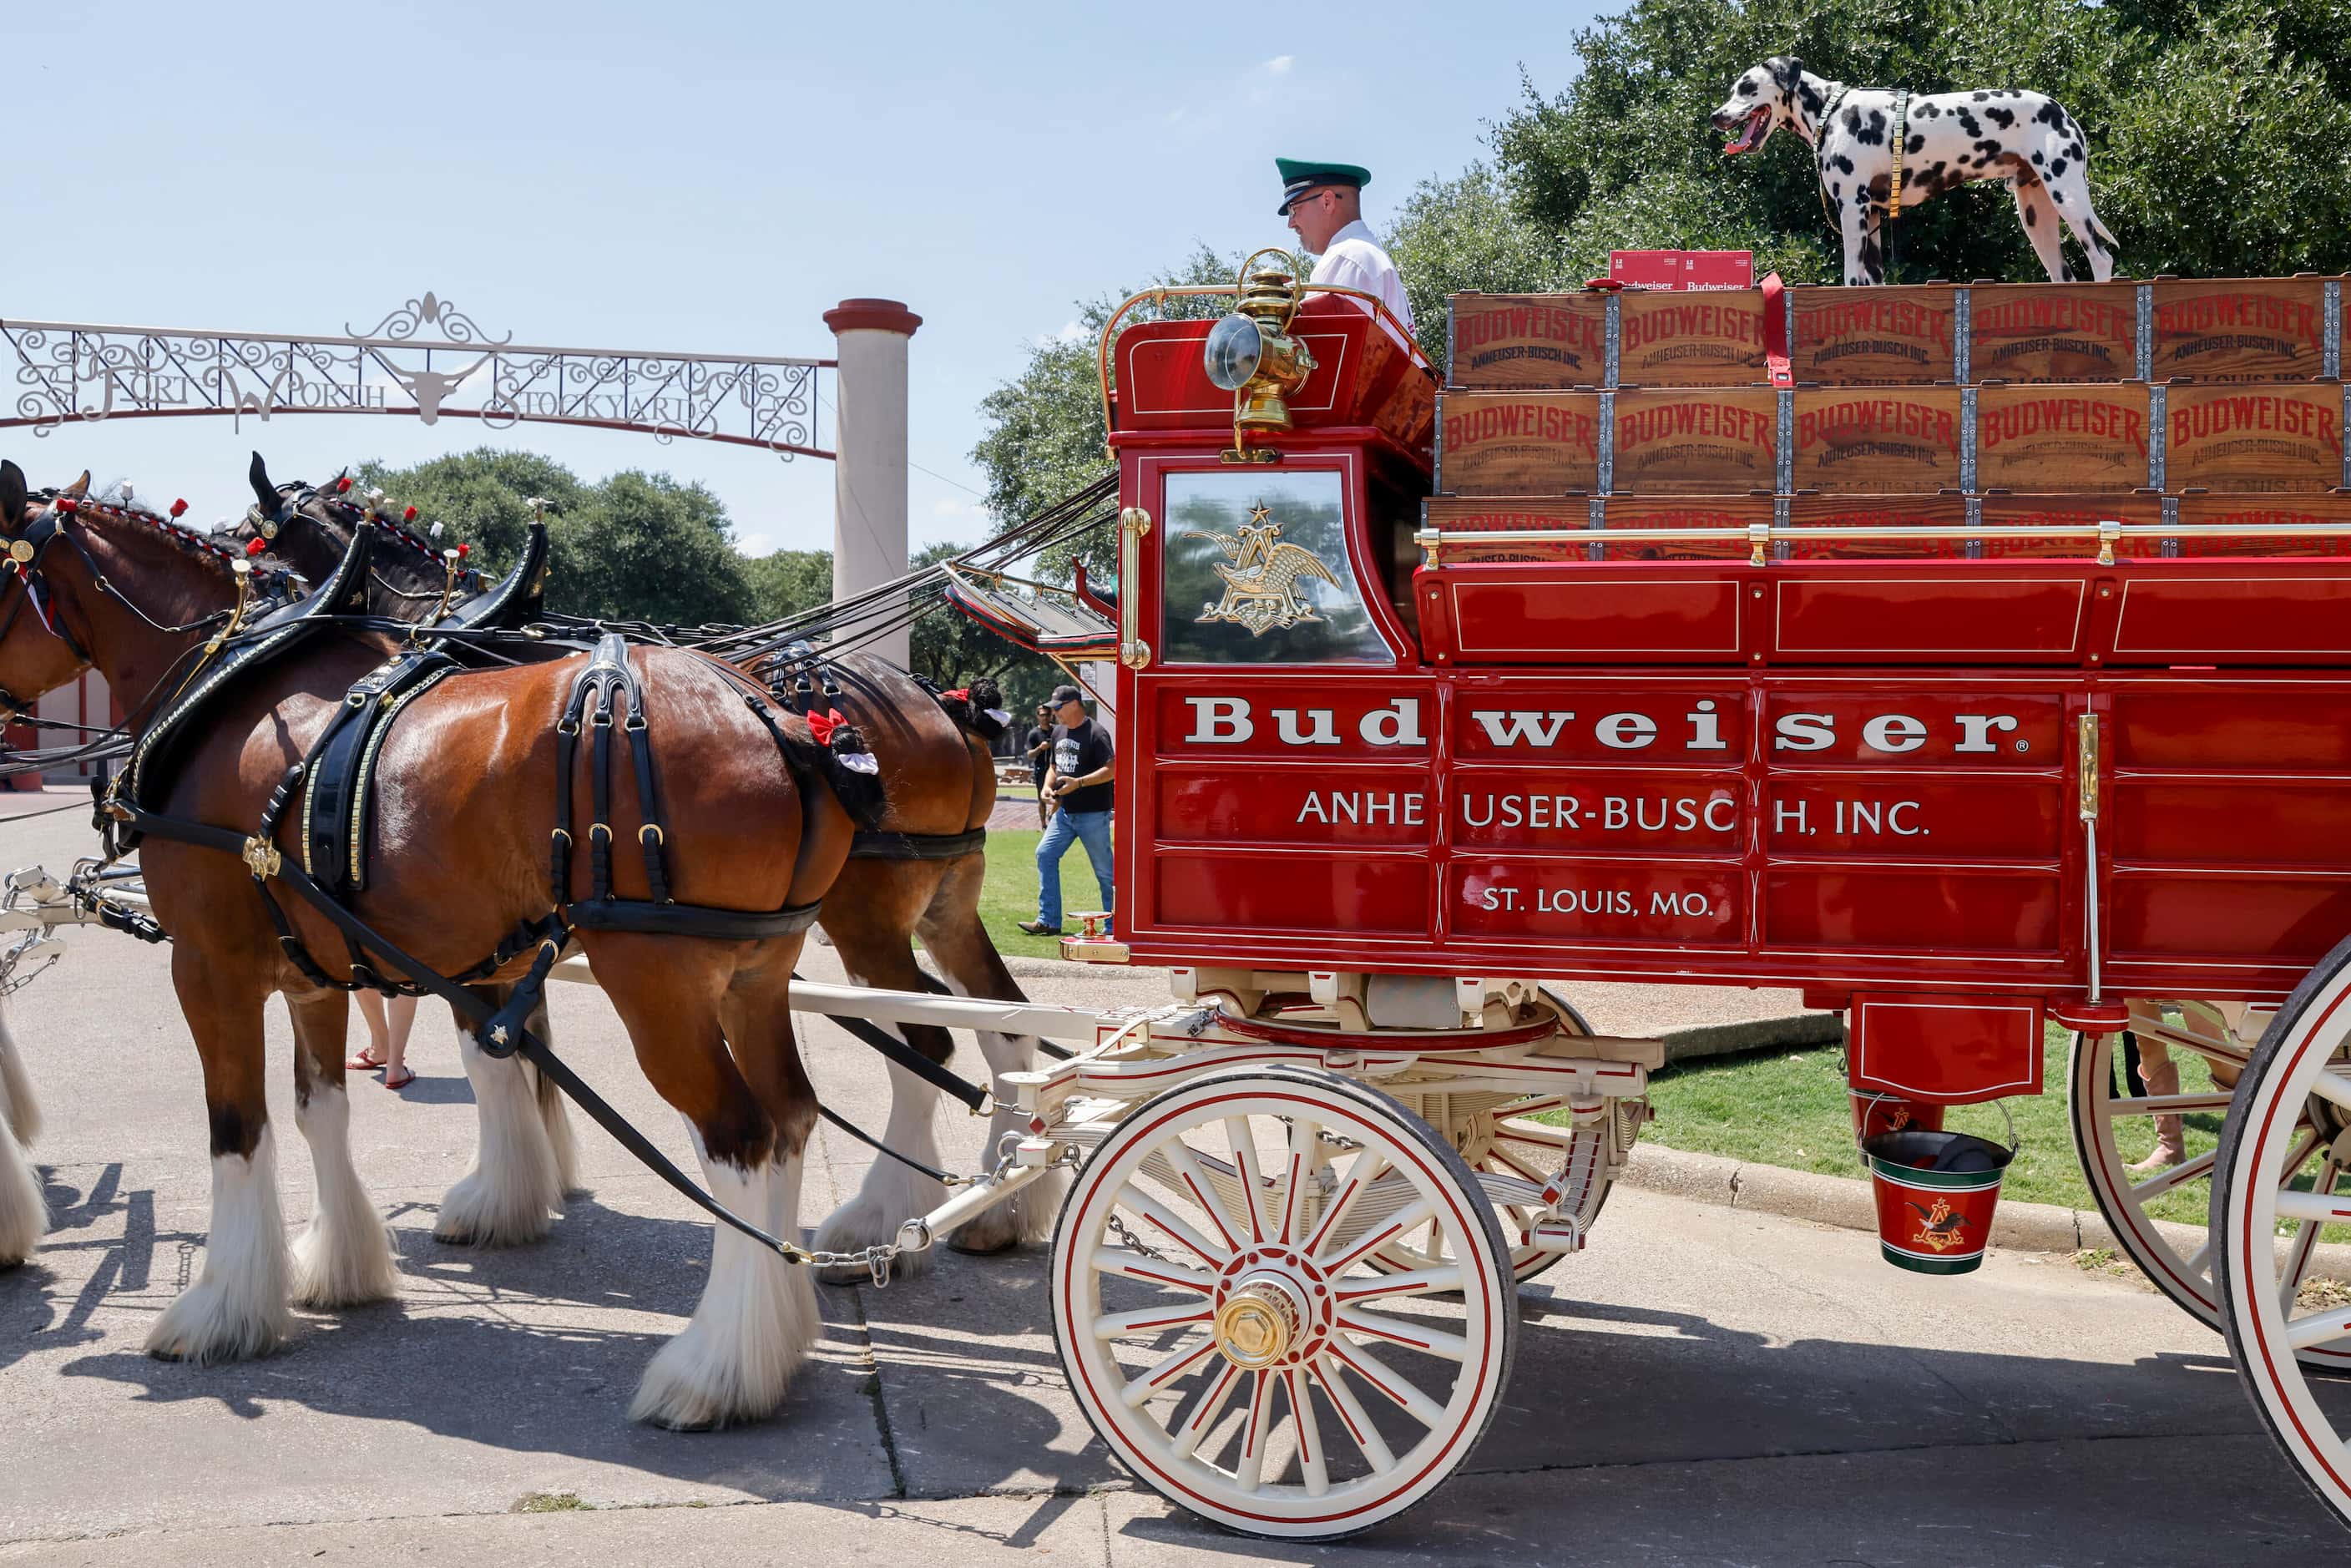 The Budweiser Clydesdales and beer wagon stop at Billy Bob’s Texas in The Stockyards for an...